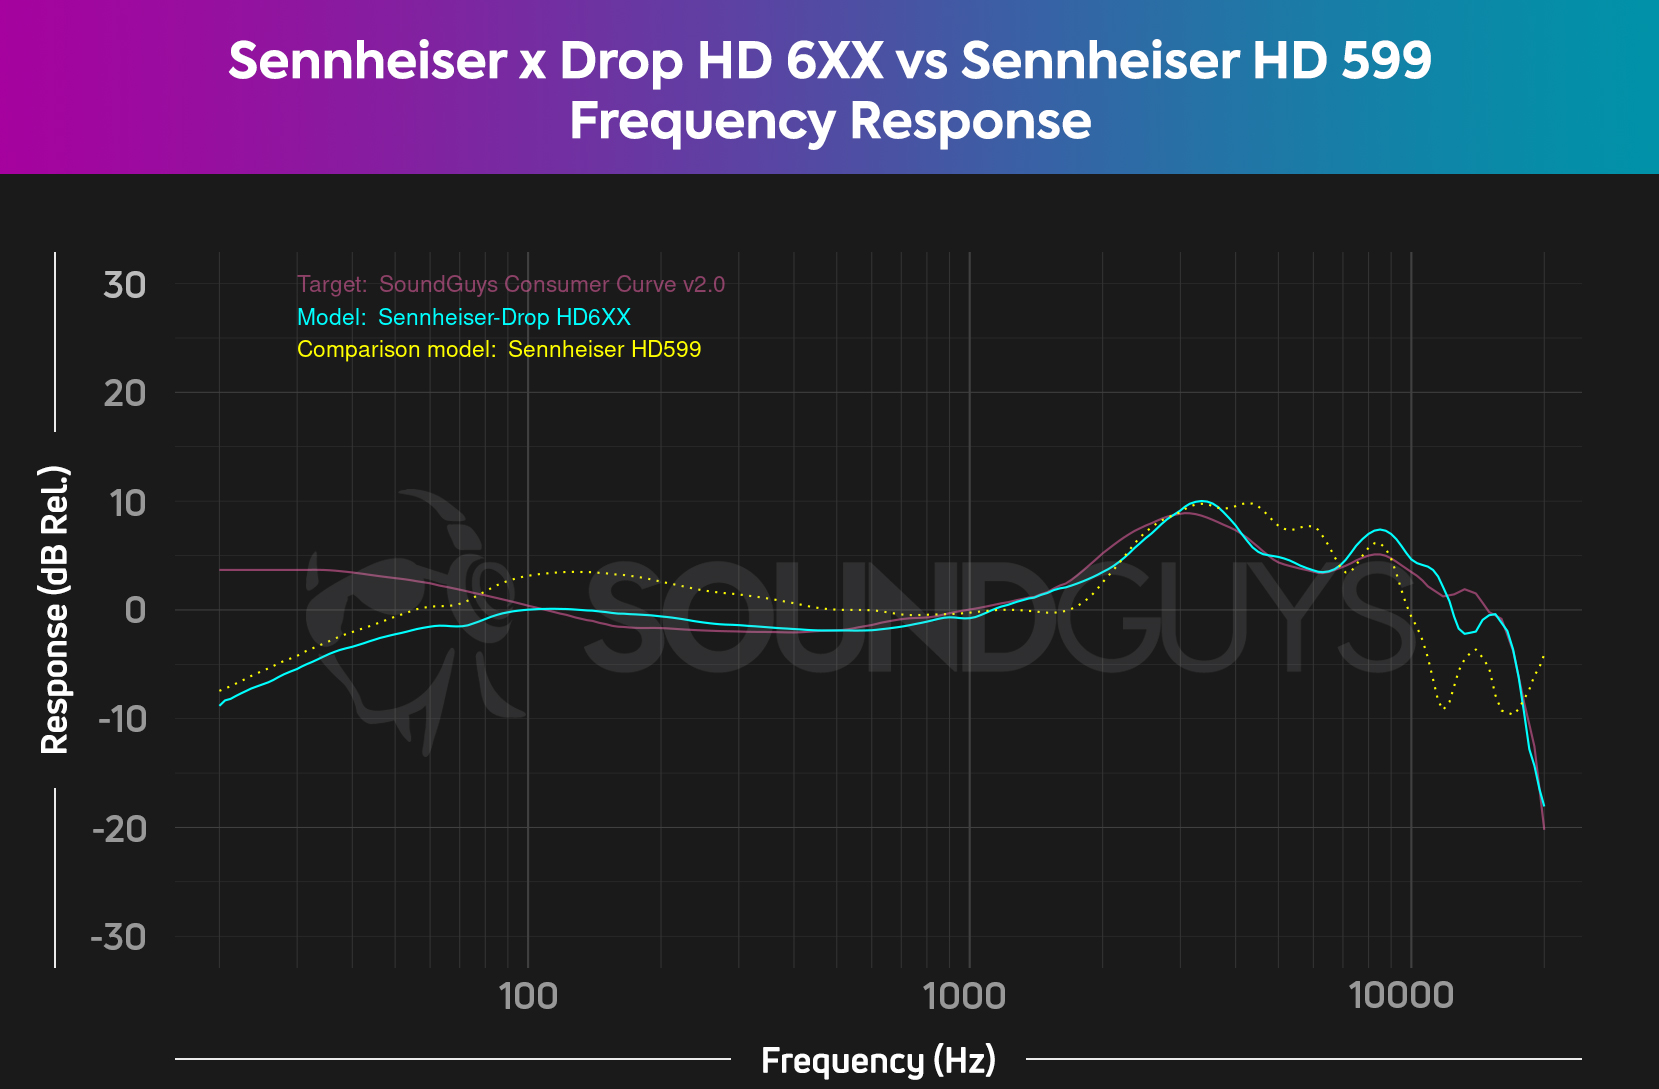 Charts shows a comparison of the Sennheiser x Drop HD 6XX and the Sennheiser HD 599 compared to our ideal consumer frequency response.